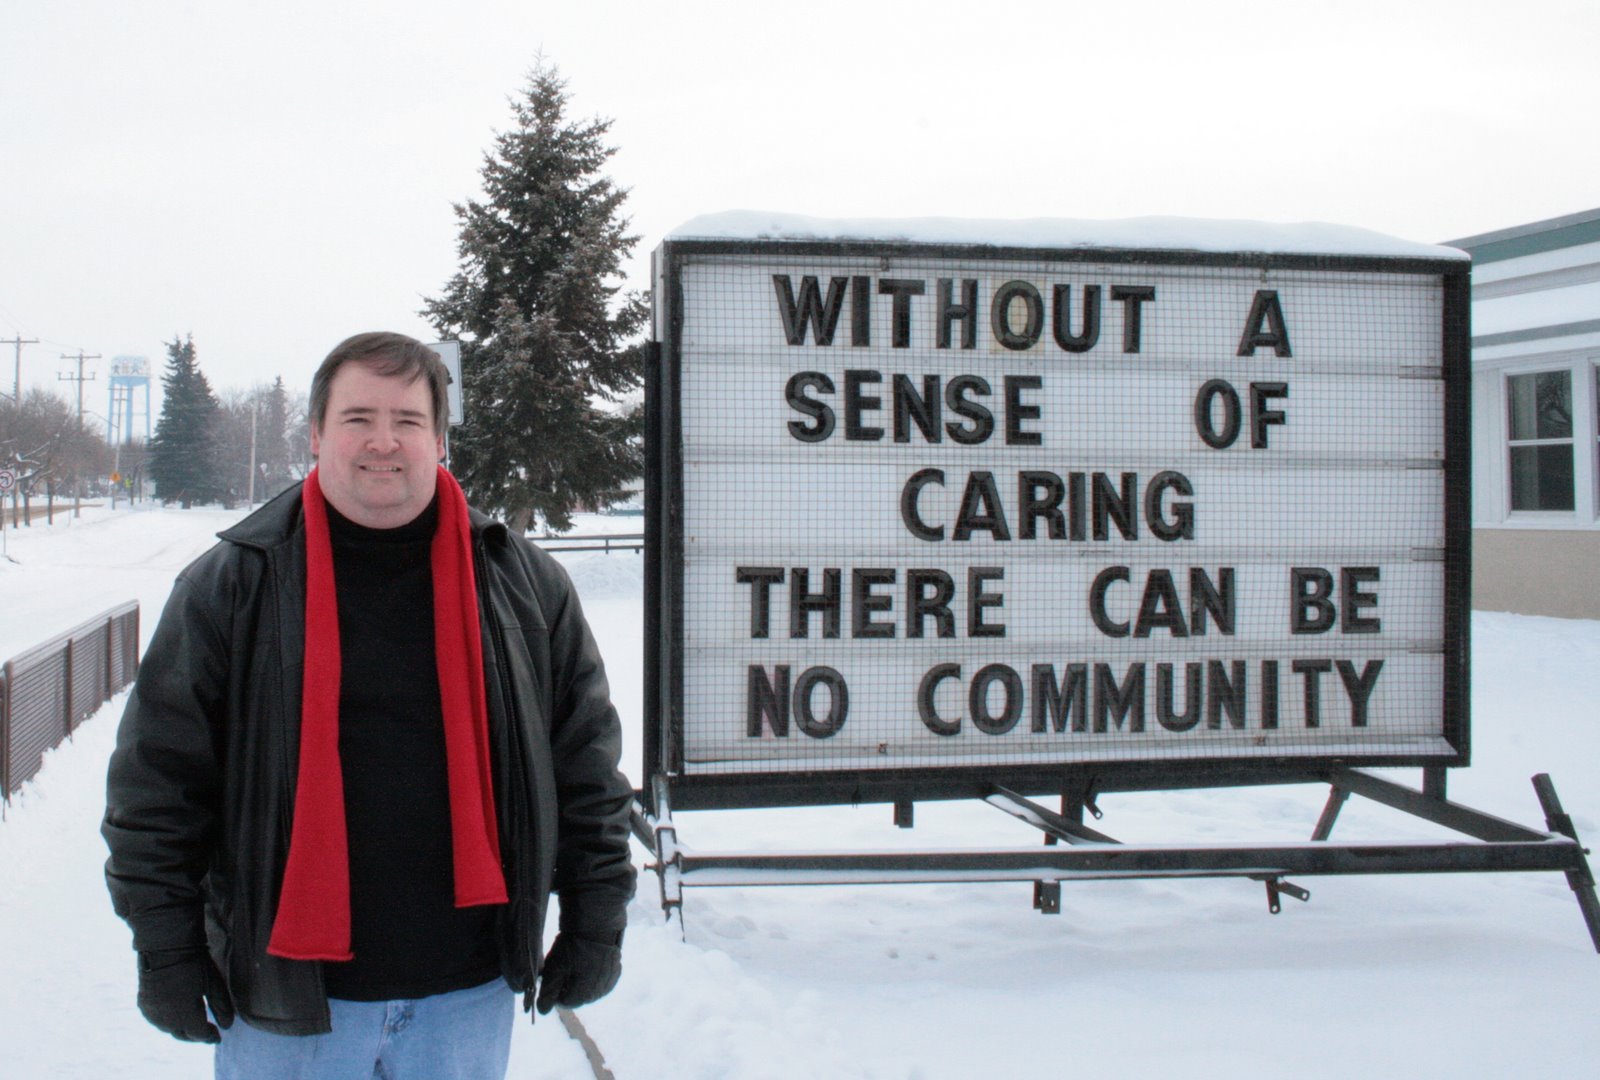 [Earl+with+caring+community+sign.jpg]